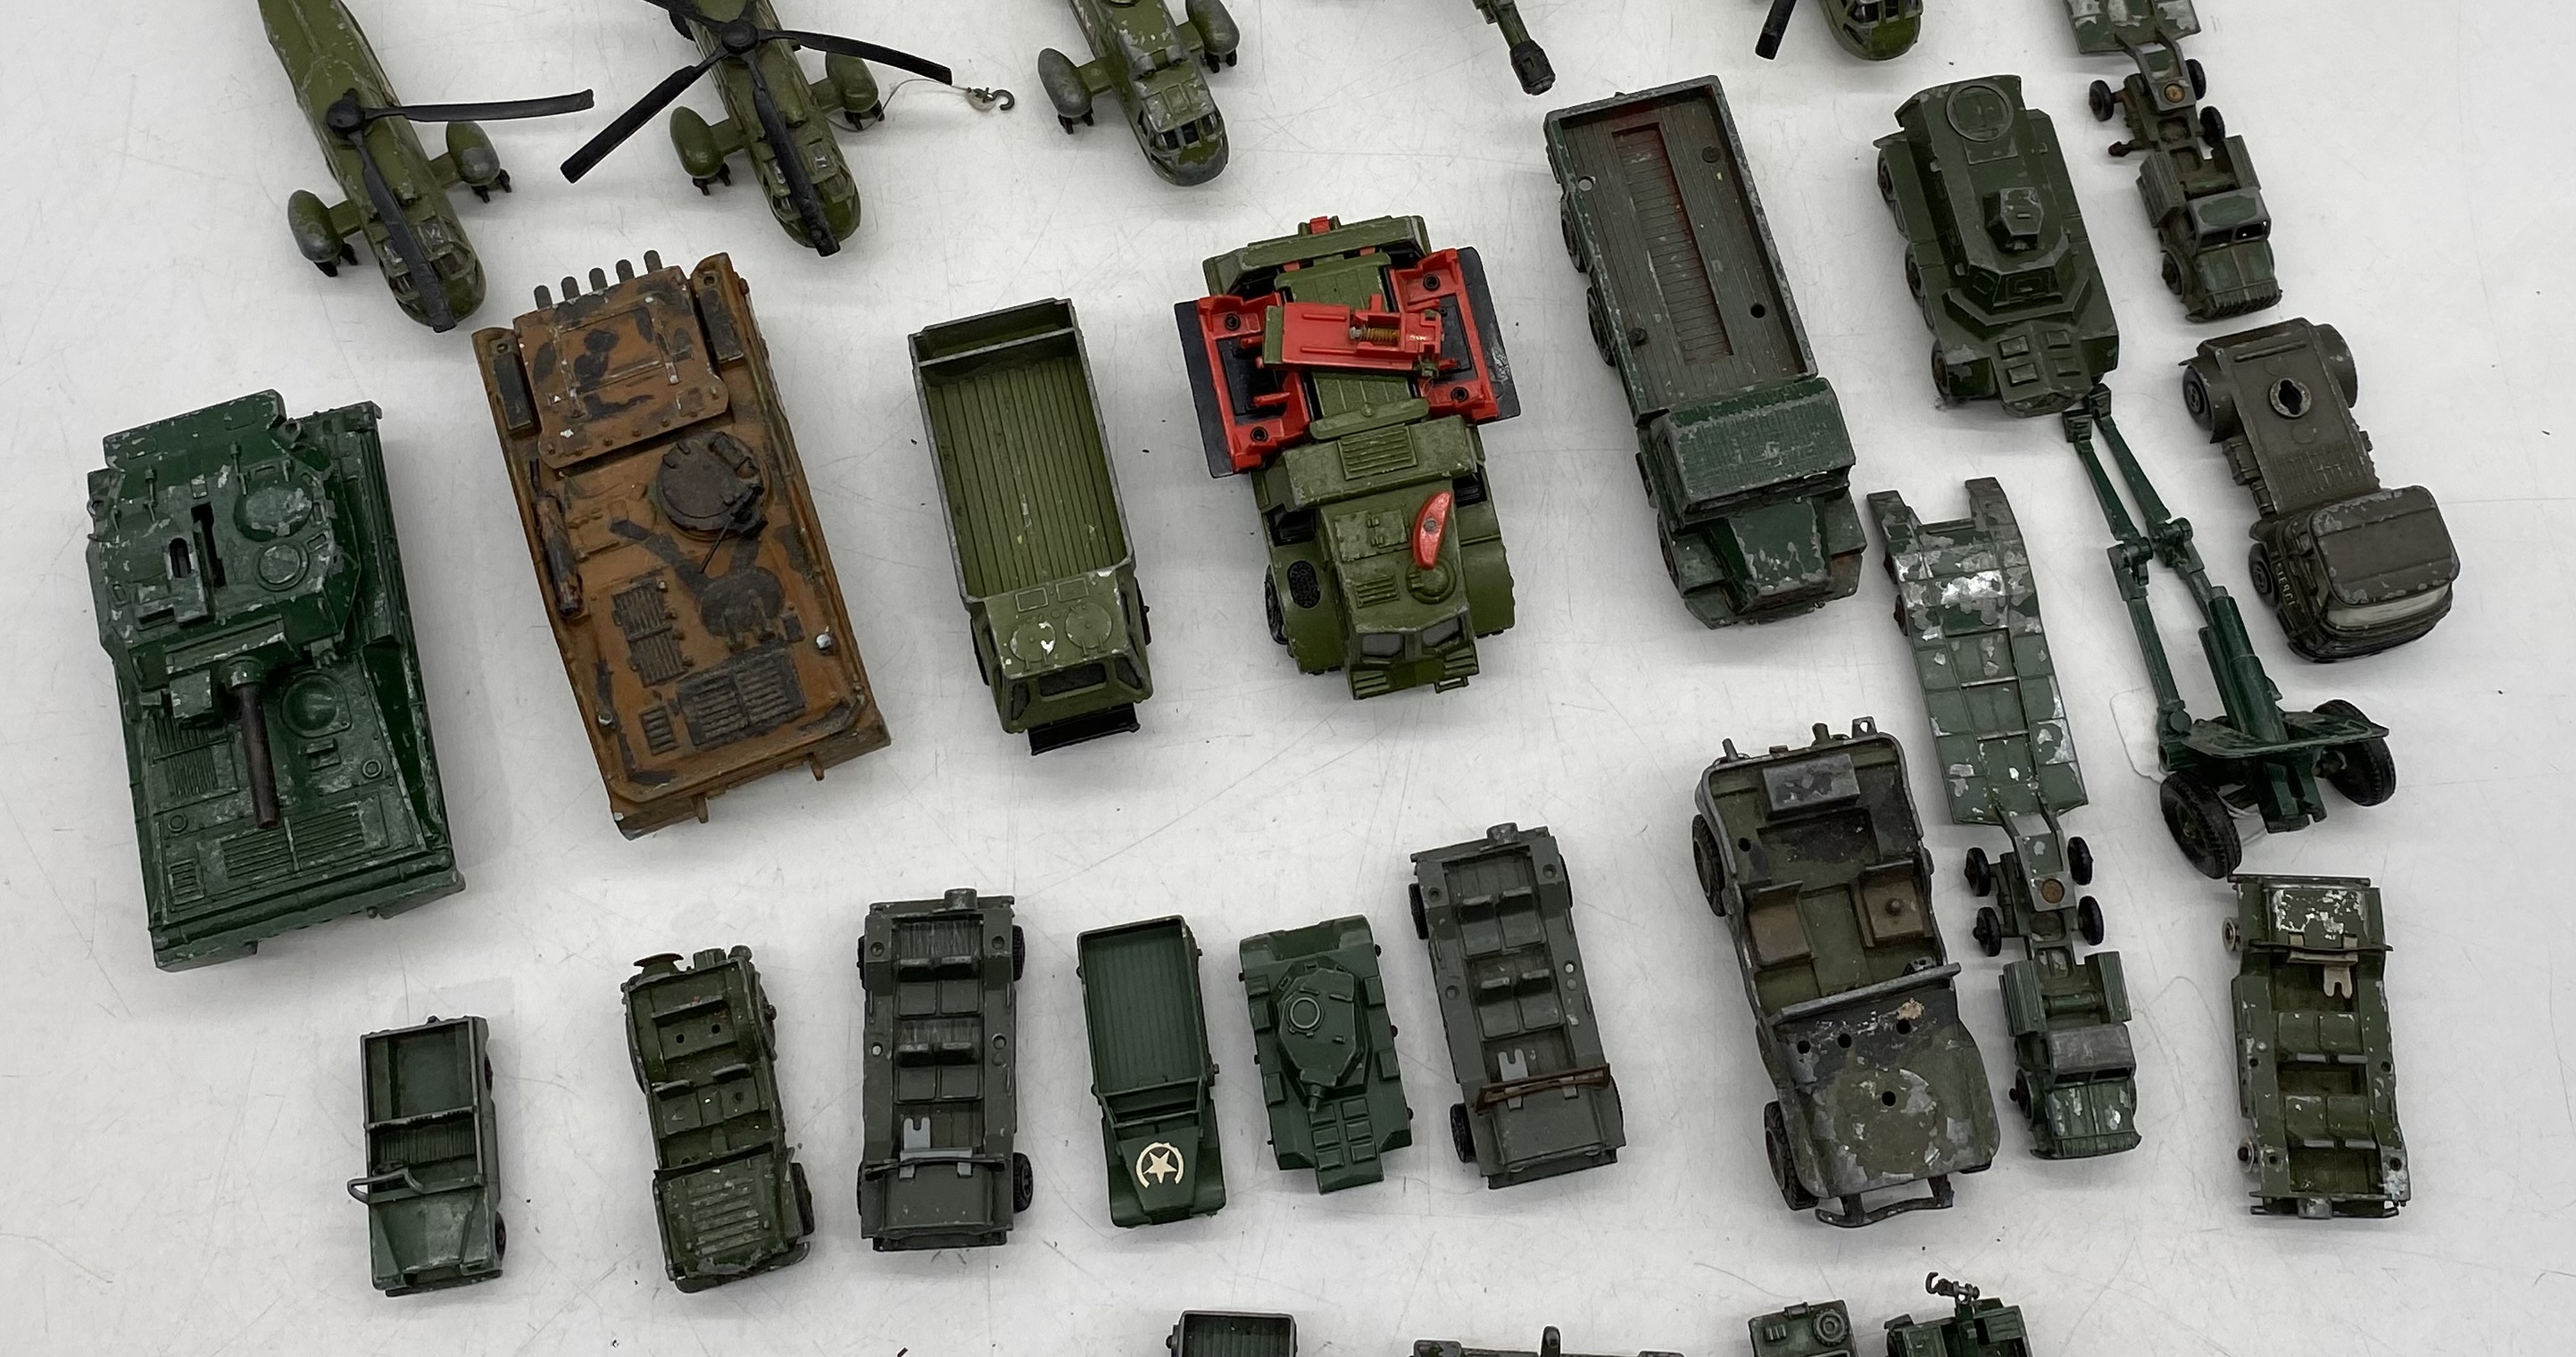 A collection of playworn die-cast military vehicles including tanks, helicopters, fighter jets, - Image 3 of 5